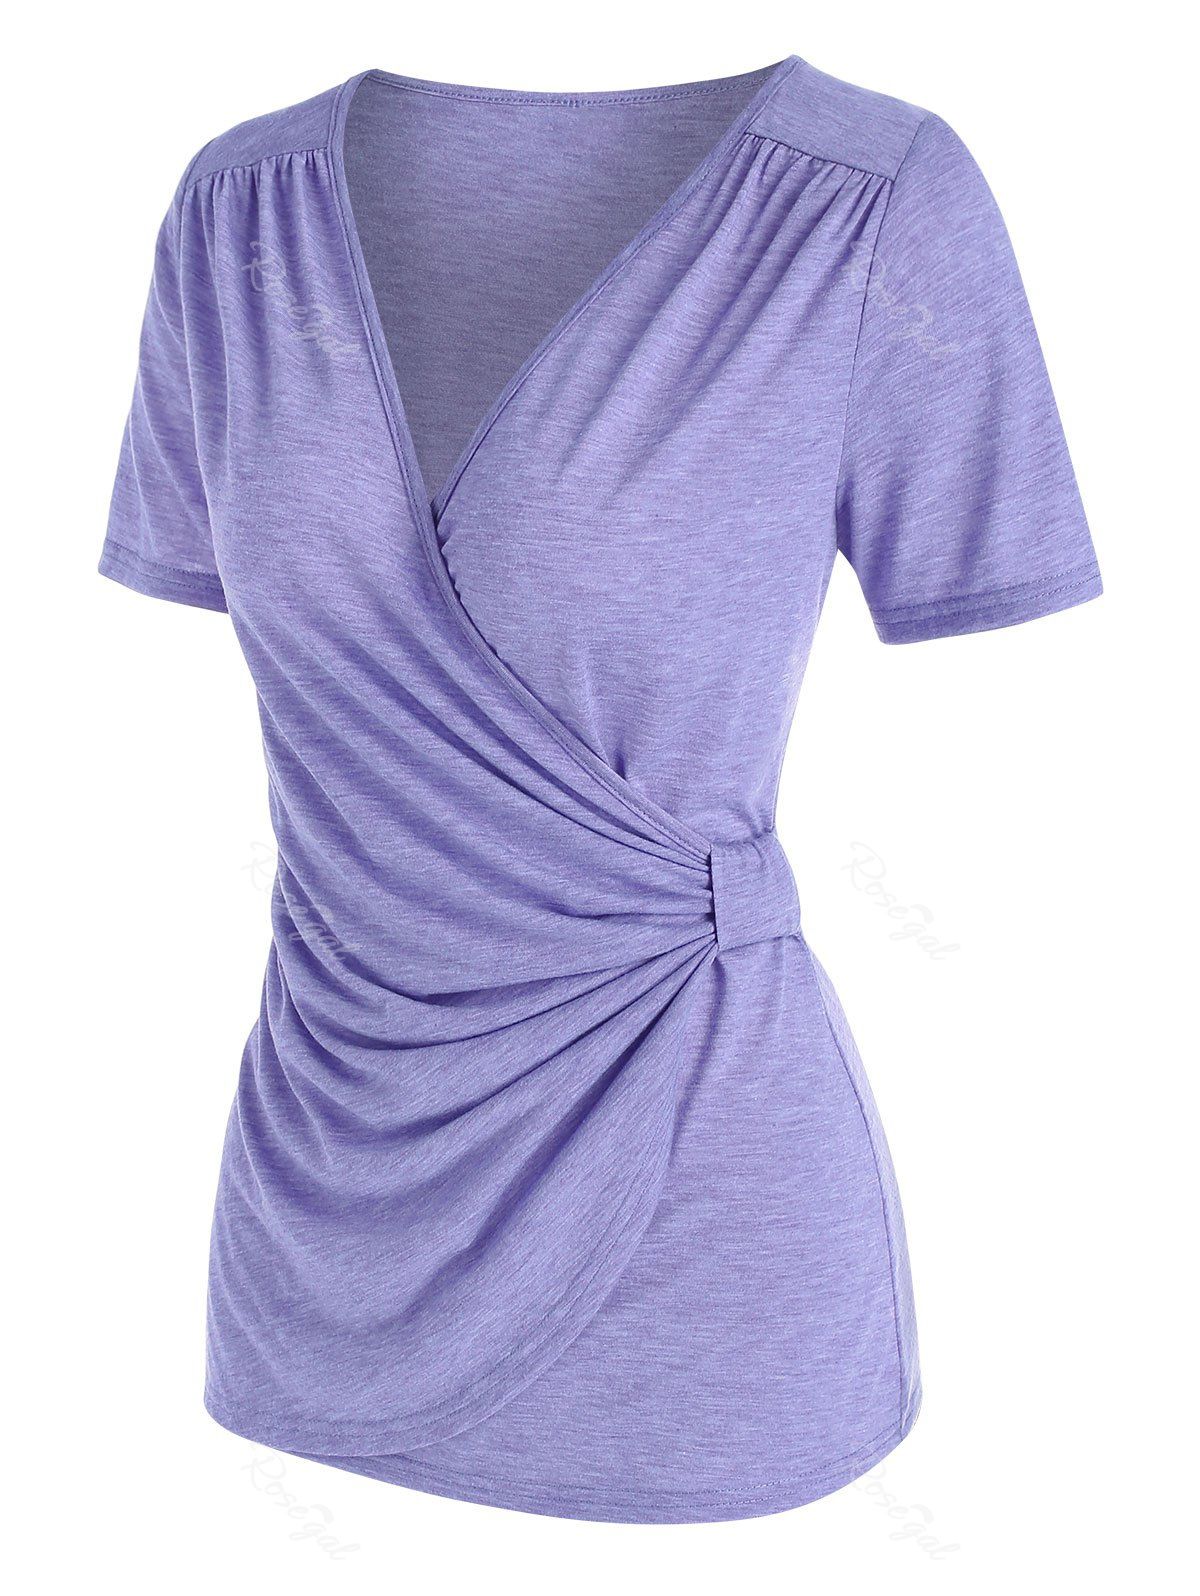 Hot Short Sleeve Ruched Heathered Surplice T-shirt  